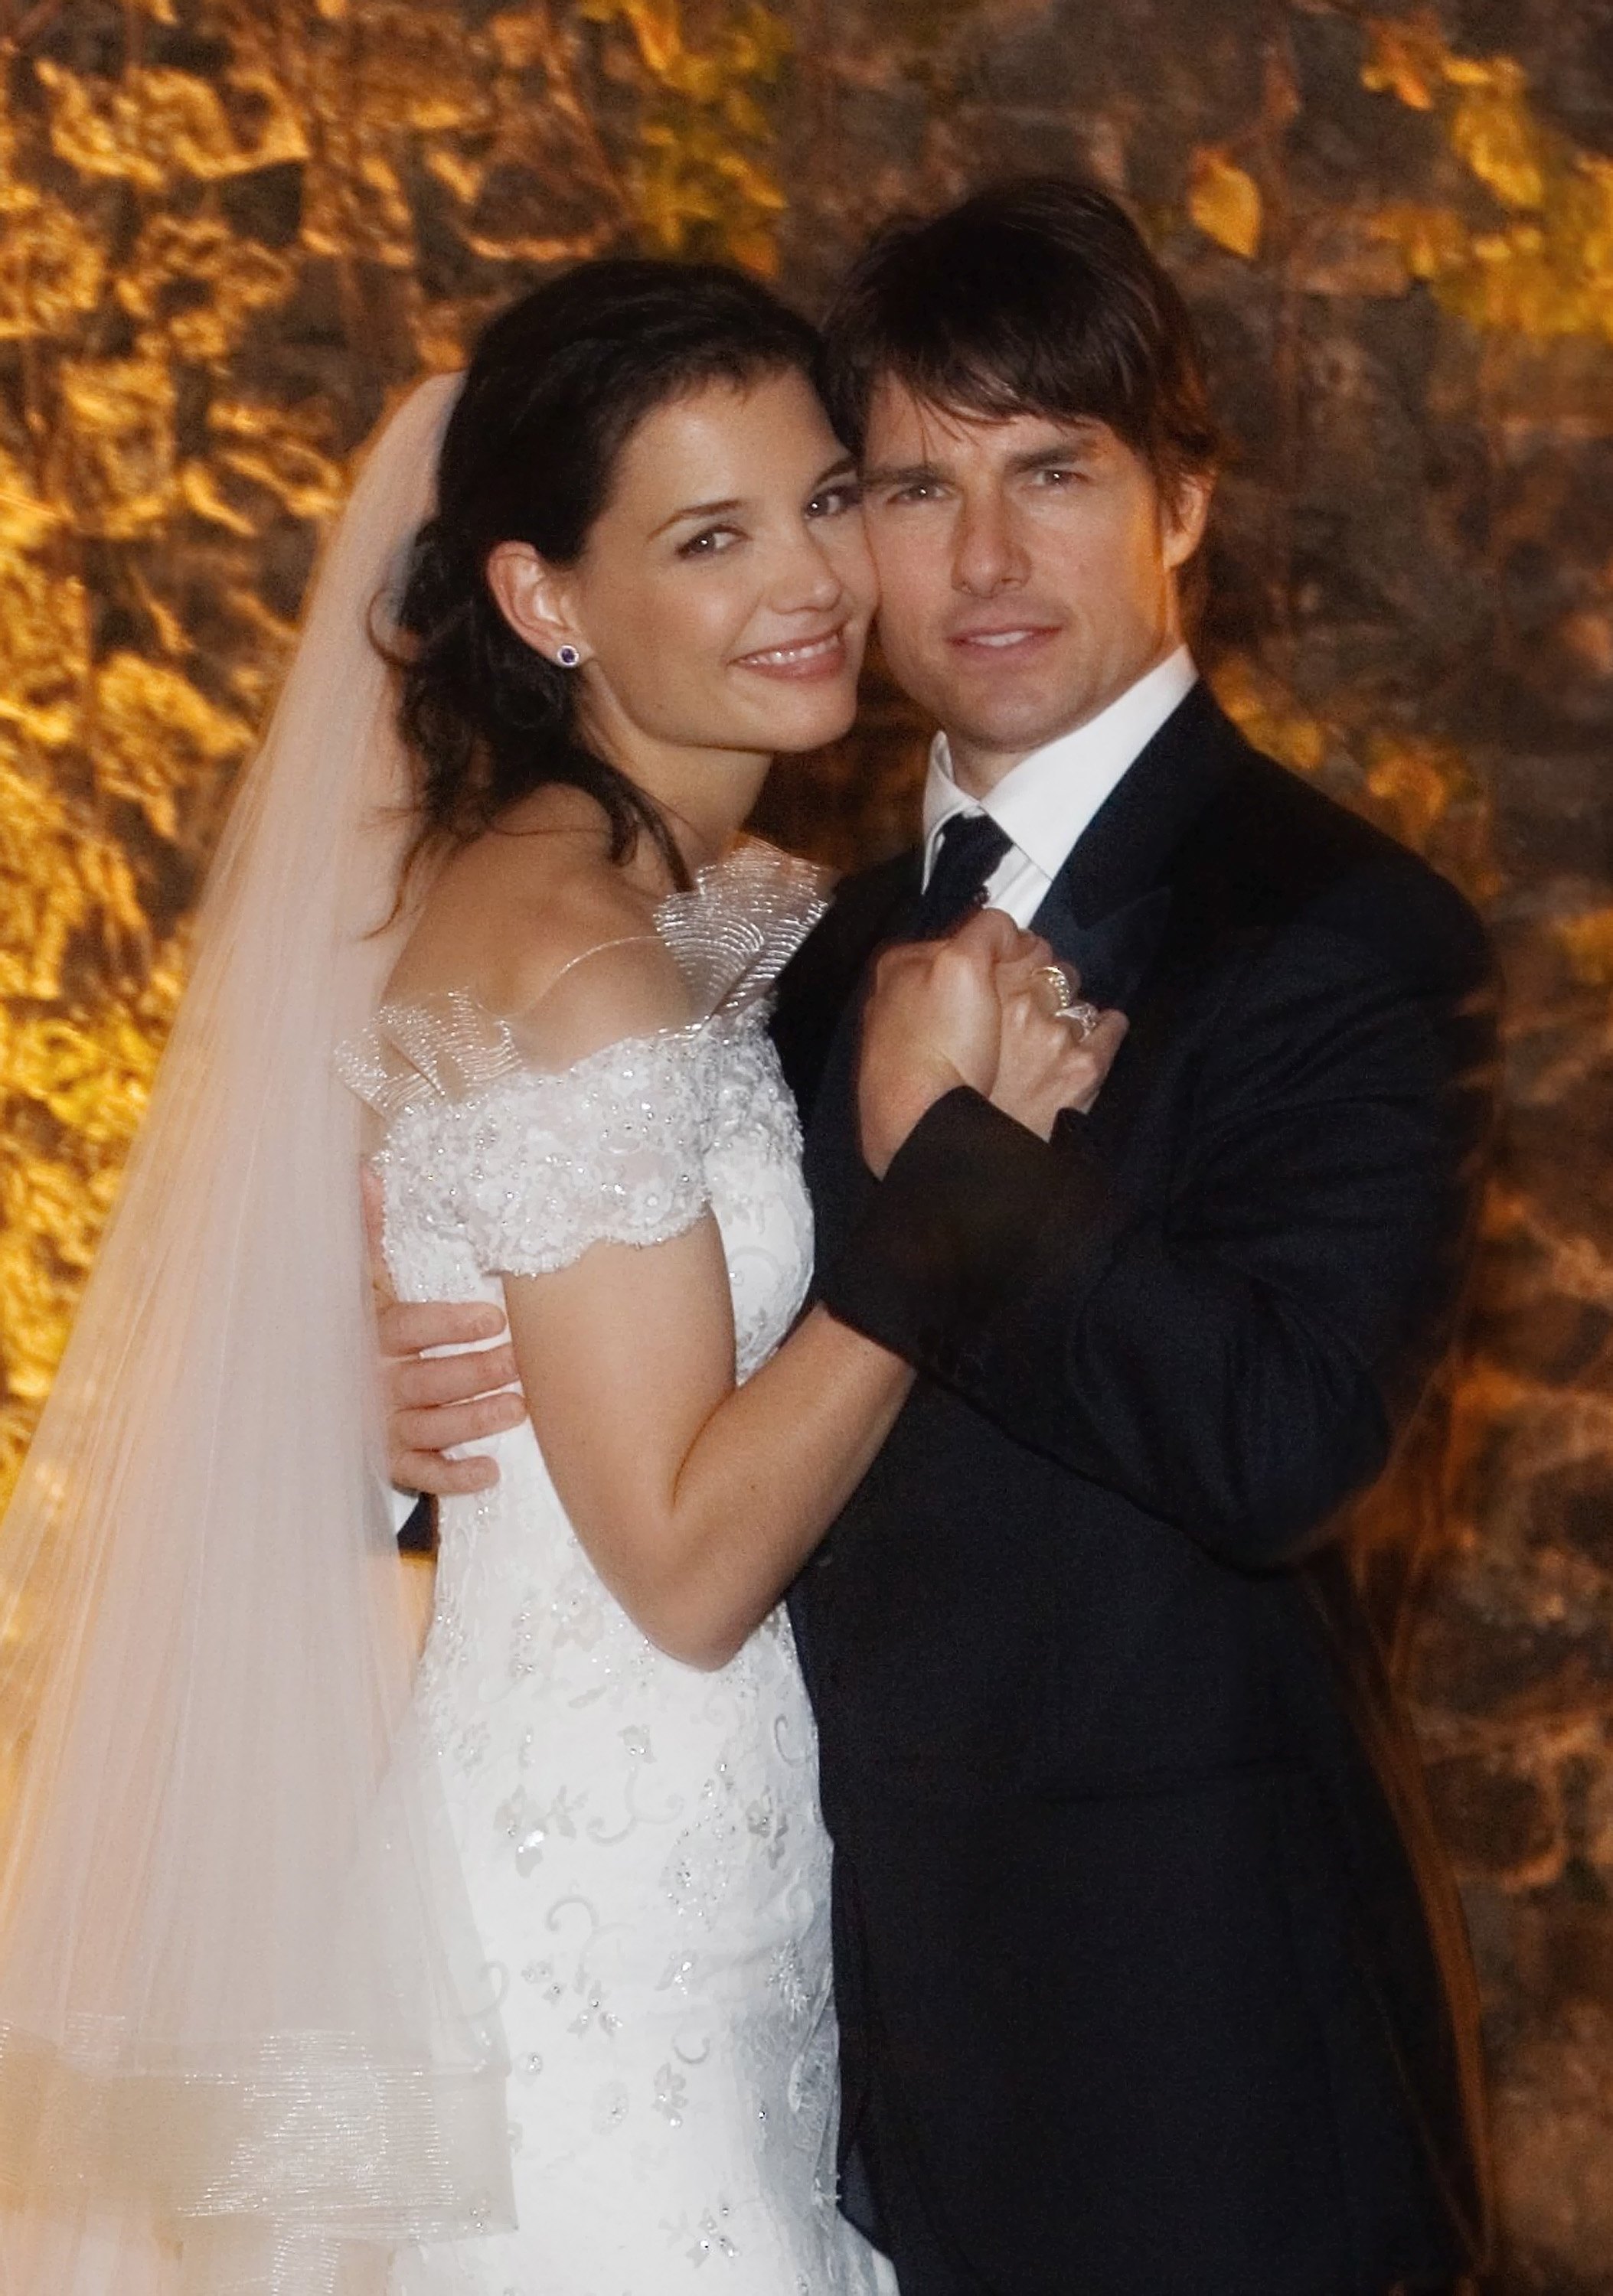 <p>In November 2006, Tom Cruise and <a href="https://www.wonderwall.com/celebrity/profiles/overview/katie-holmes-332.article">Katie Holmes</a> tied the knot at the Odescalchi Castle in Lake Bracciano, Italy. Their star-studded wedding included celebrity guests like <a href="https://www.wonderwall.com/celebrity/profiles/overview/will-smith-436.article">Will Smith</a> and <a href="https://www.wonderwall.com/celebrity/profiles/overview/jada-pinkett-smith-1032.article">Jada Pinkett Smith</a>, <a href="https://www.wonderwall.com/celebrity/profiles/overview/david-beckham-268.article">David Beckham</a> and <a href="https://www.wonderwall.com/celebrity/profiles/overview/victoria-beckham-416.article">Victoria Beckham</a>, Jennifer Lopez and Marc Anthony, Brooke Shields and more.</p>